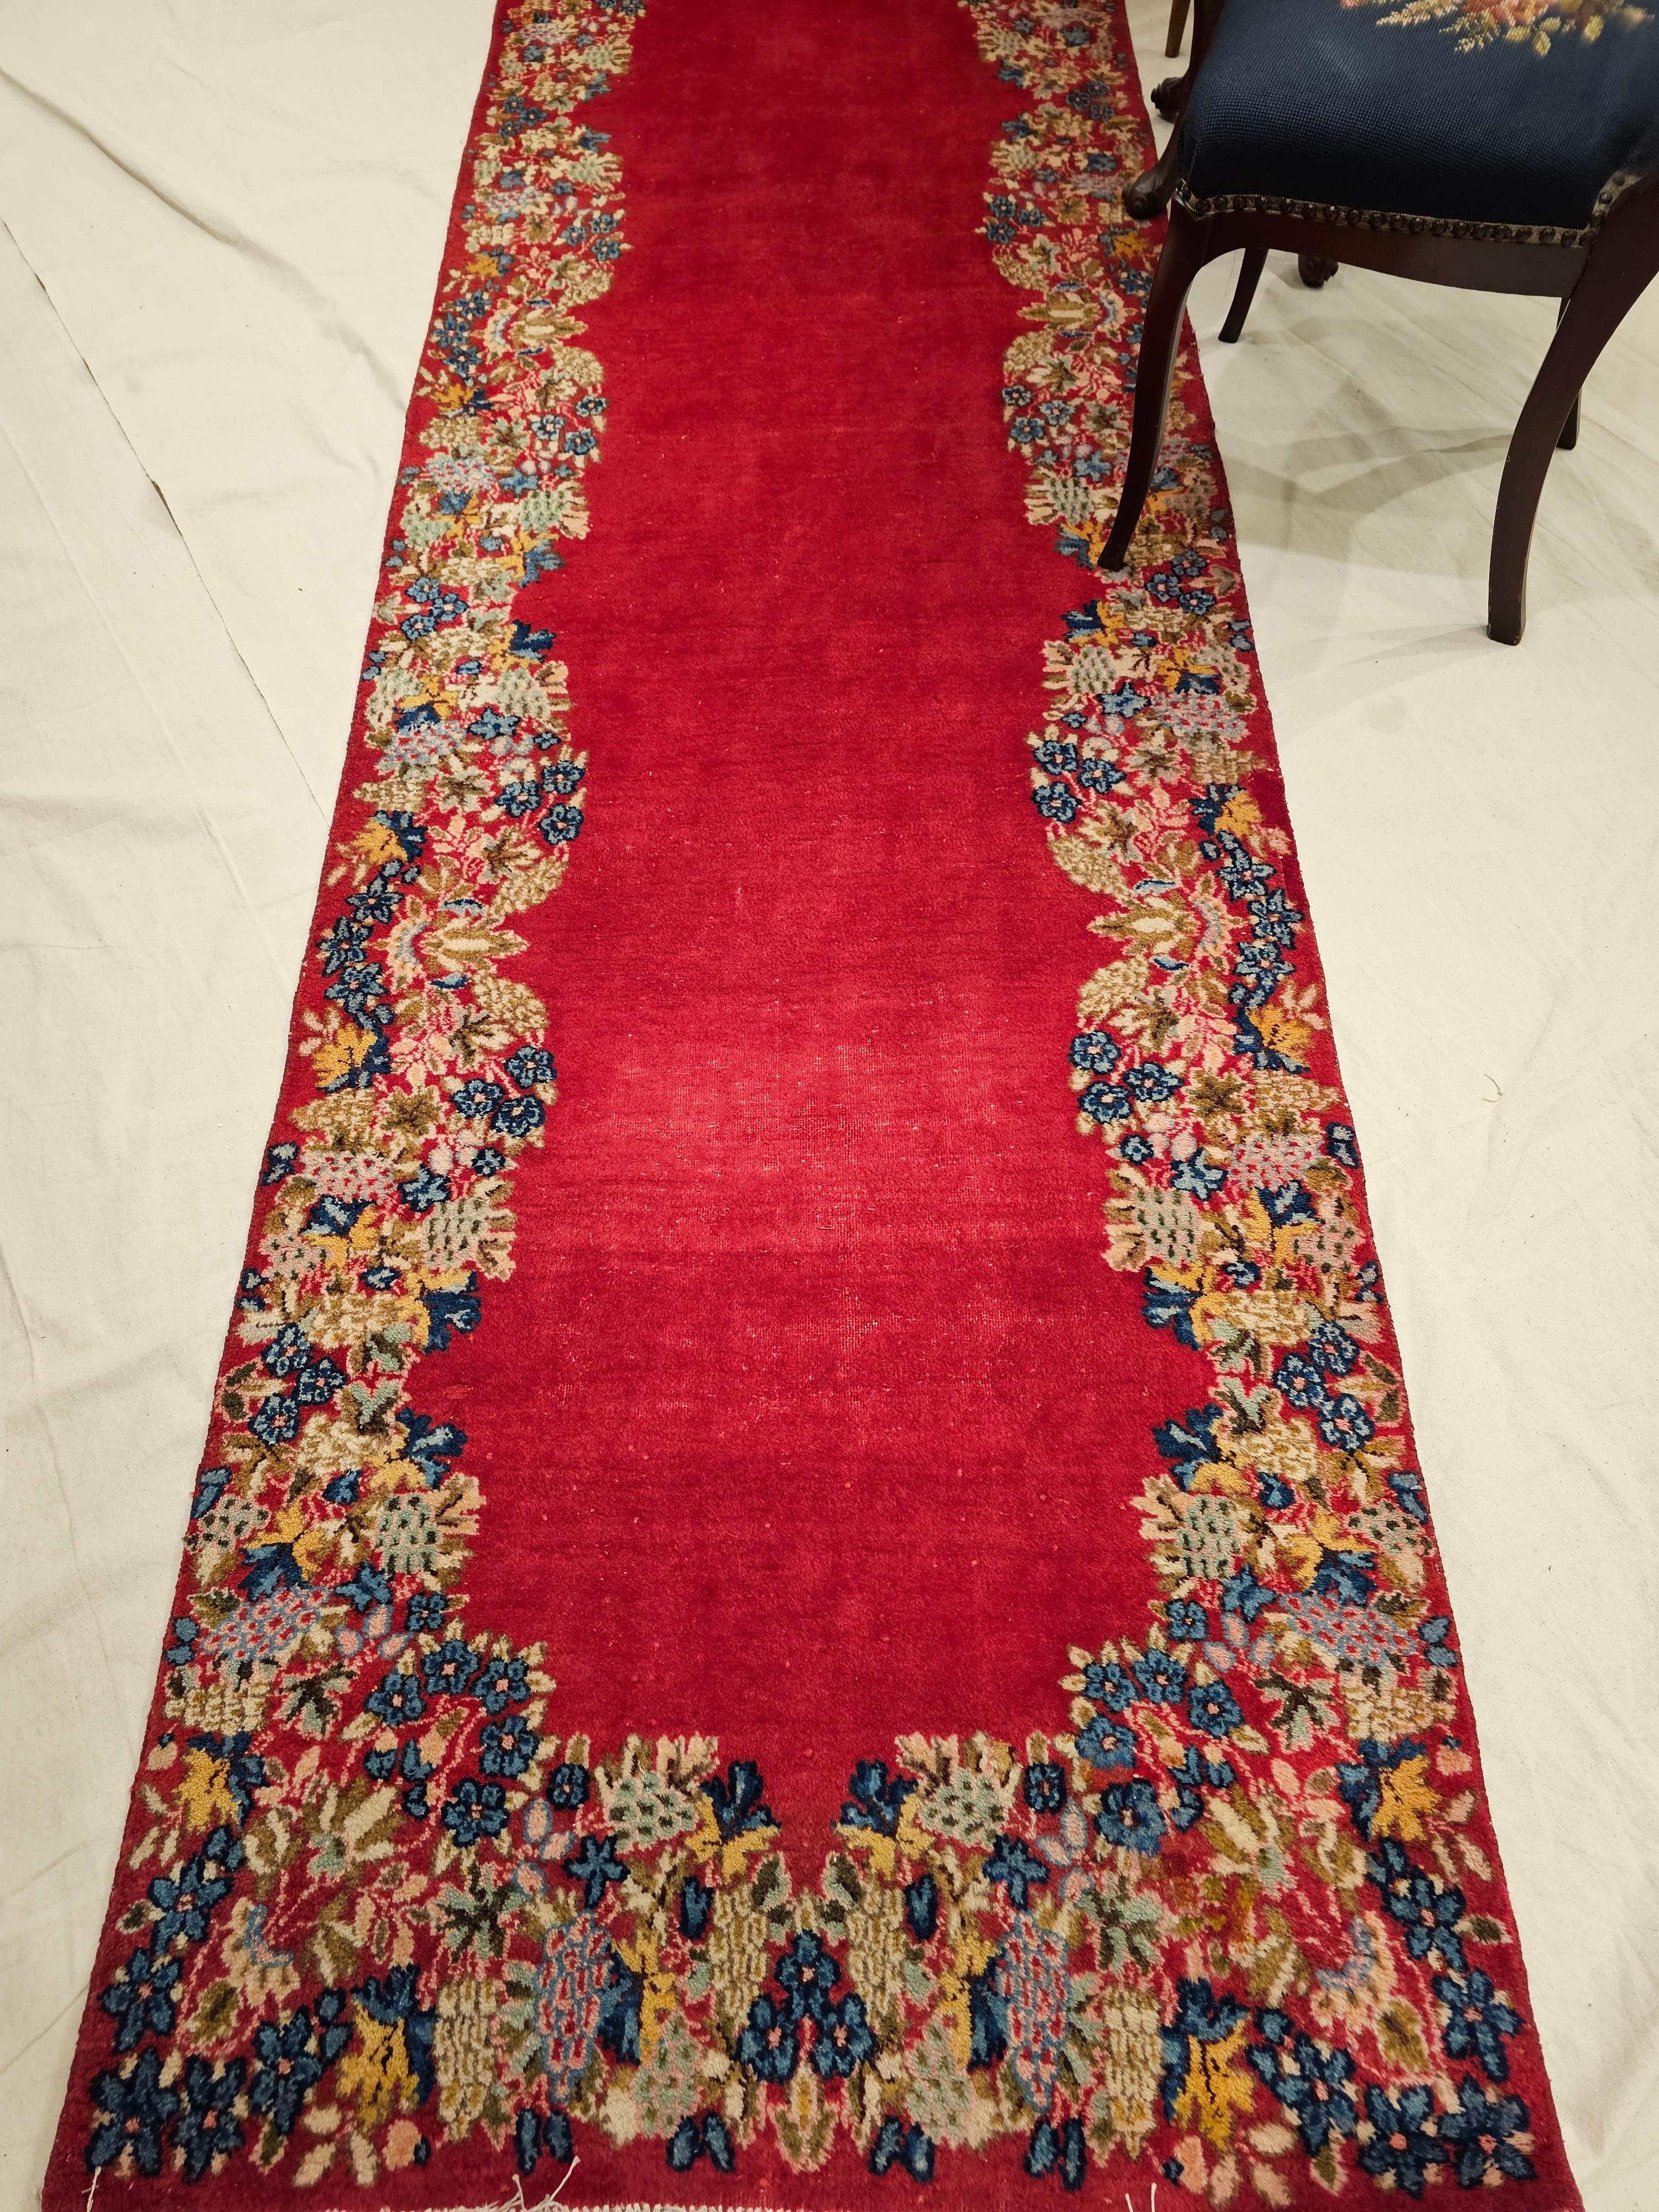  Vintage Persian Kerman Runner in Floral Design in Red, Yellow, Green, Blue For Sale 4